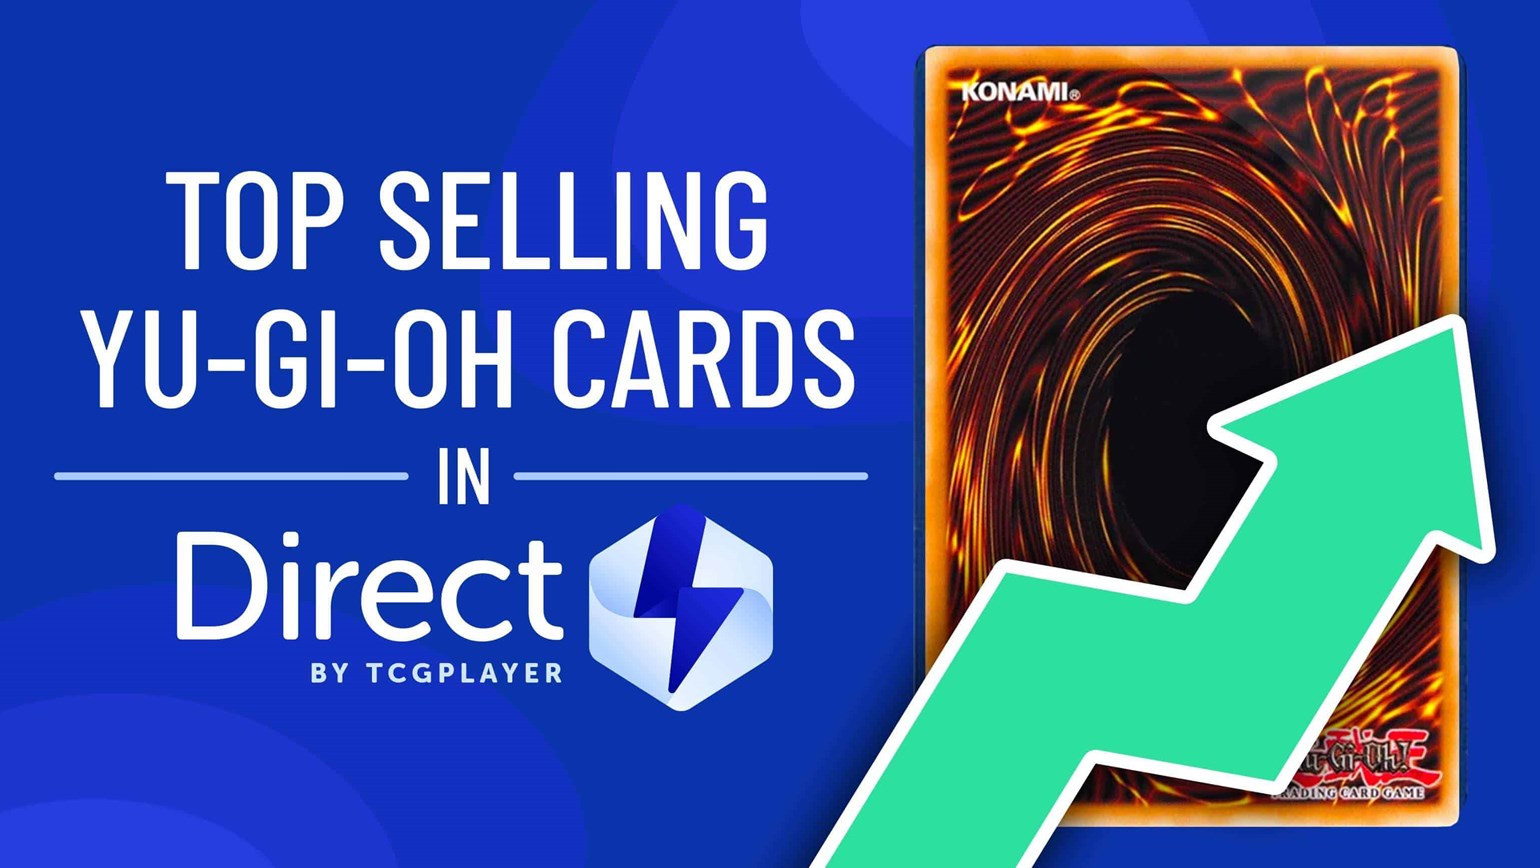 February Top Selling Yu-Gi-Oh! Cards in Direct by TCGplayer